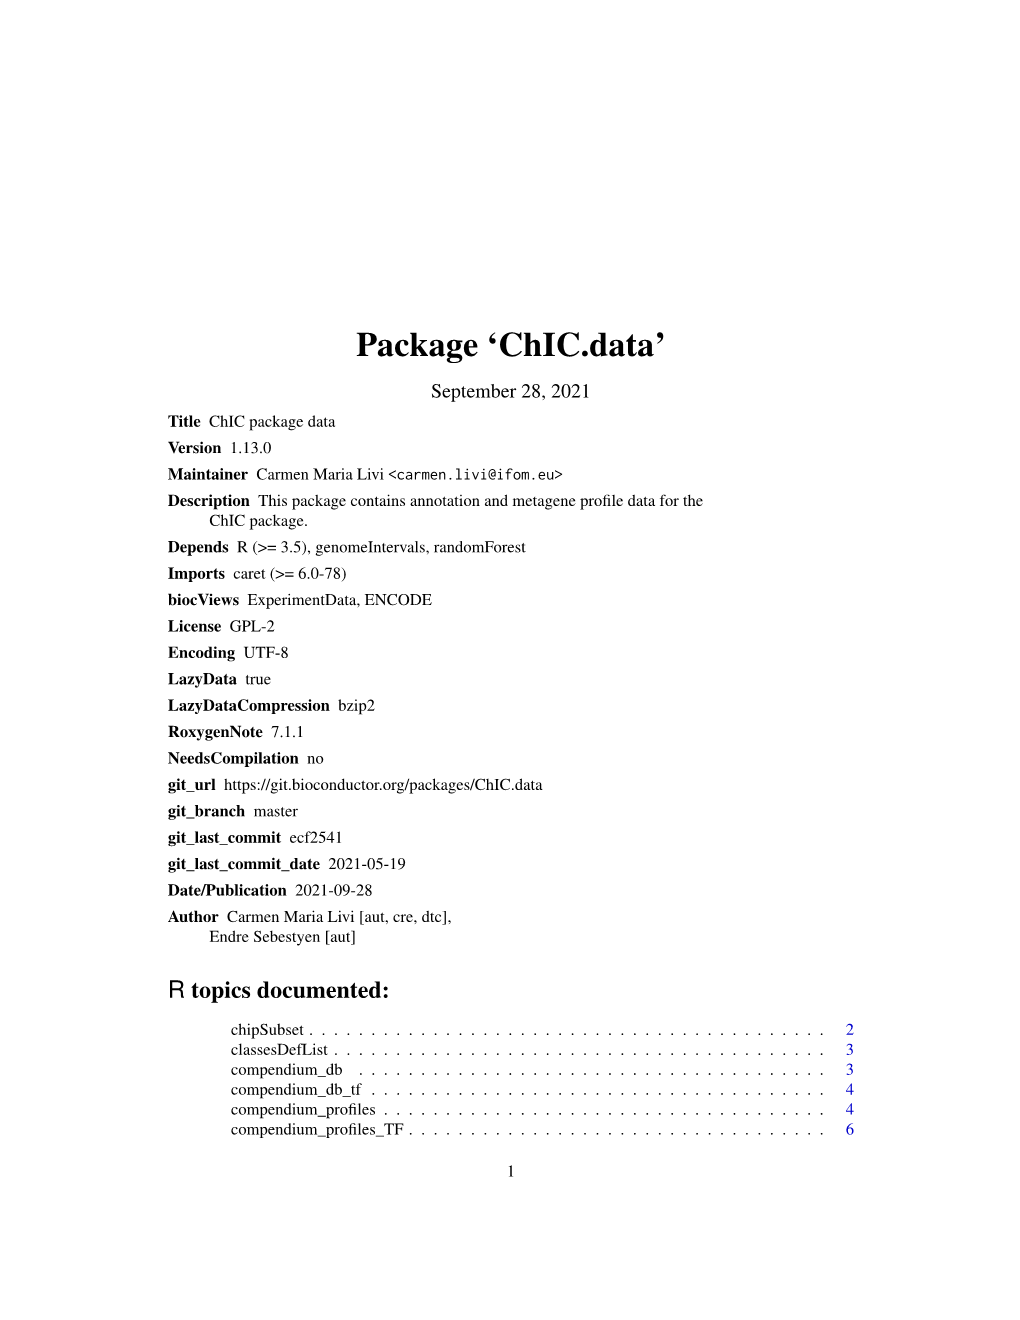 Package 'Chic.Data'